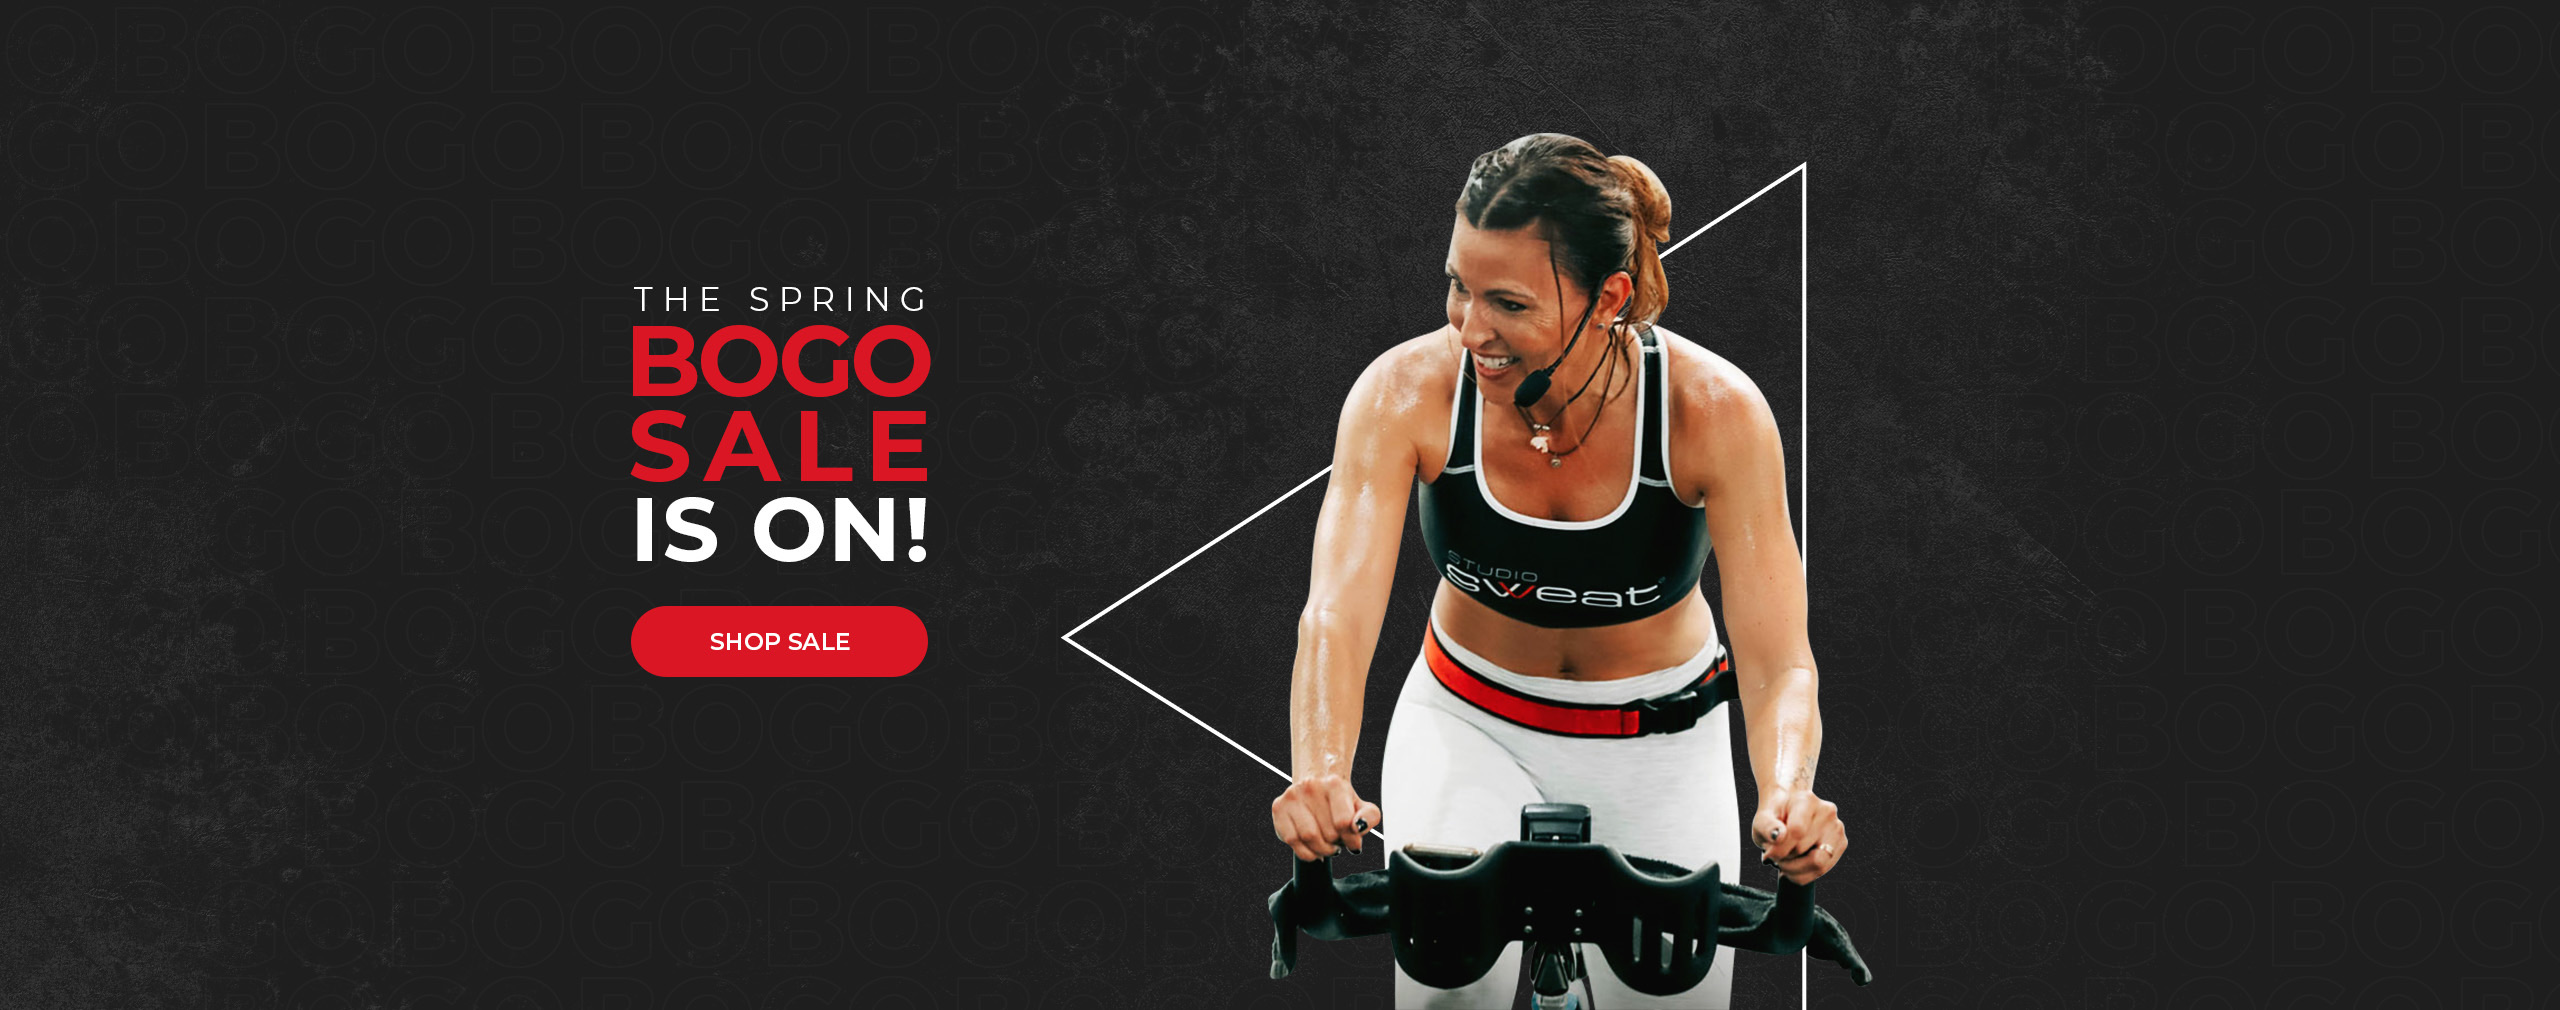 Shop Our SPRING SALE SUPER SALE and Get Unlimited Access to Studio SWEAT onDemand Indoor Cycling and Training workouts from home!